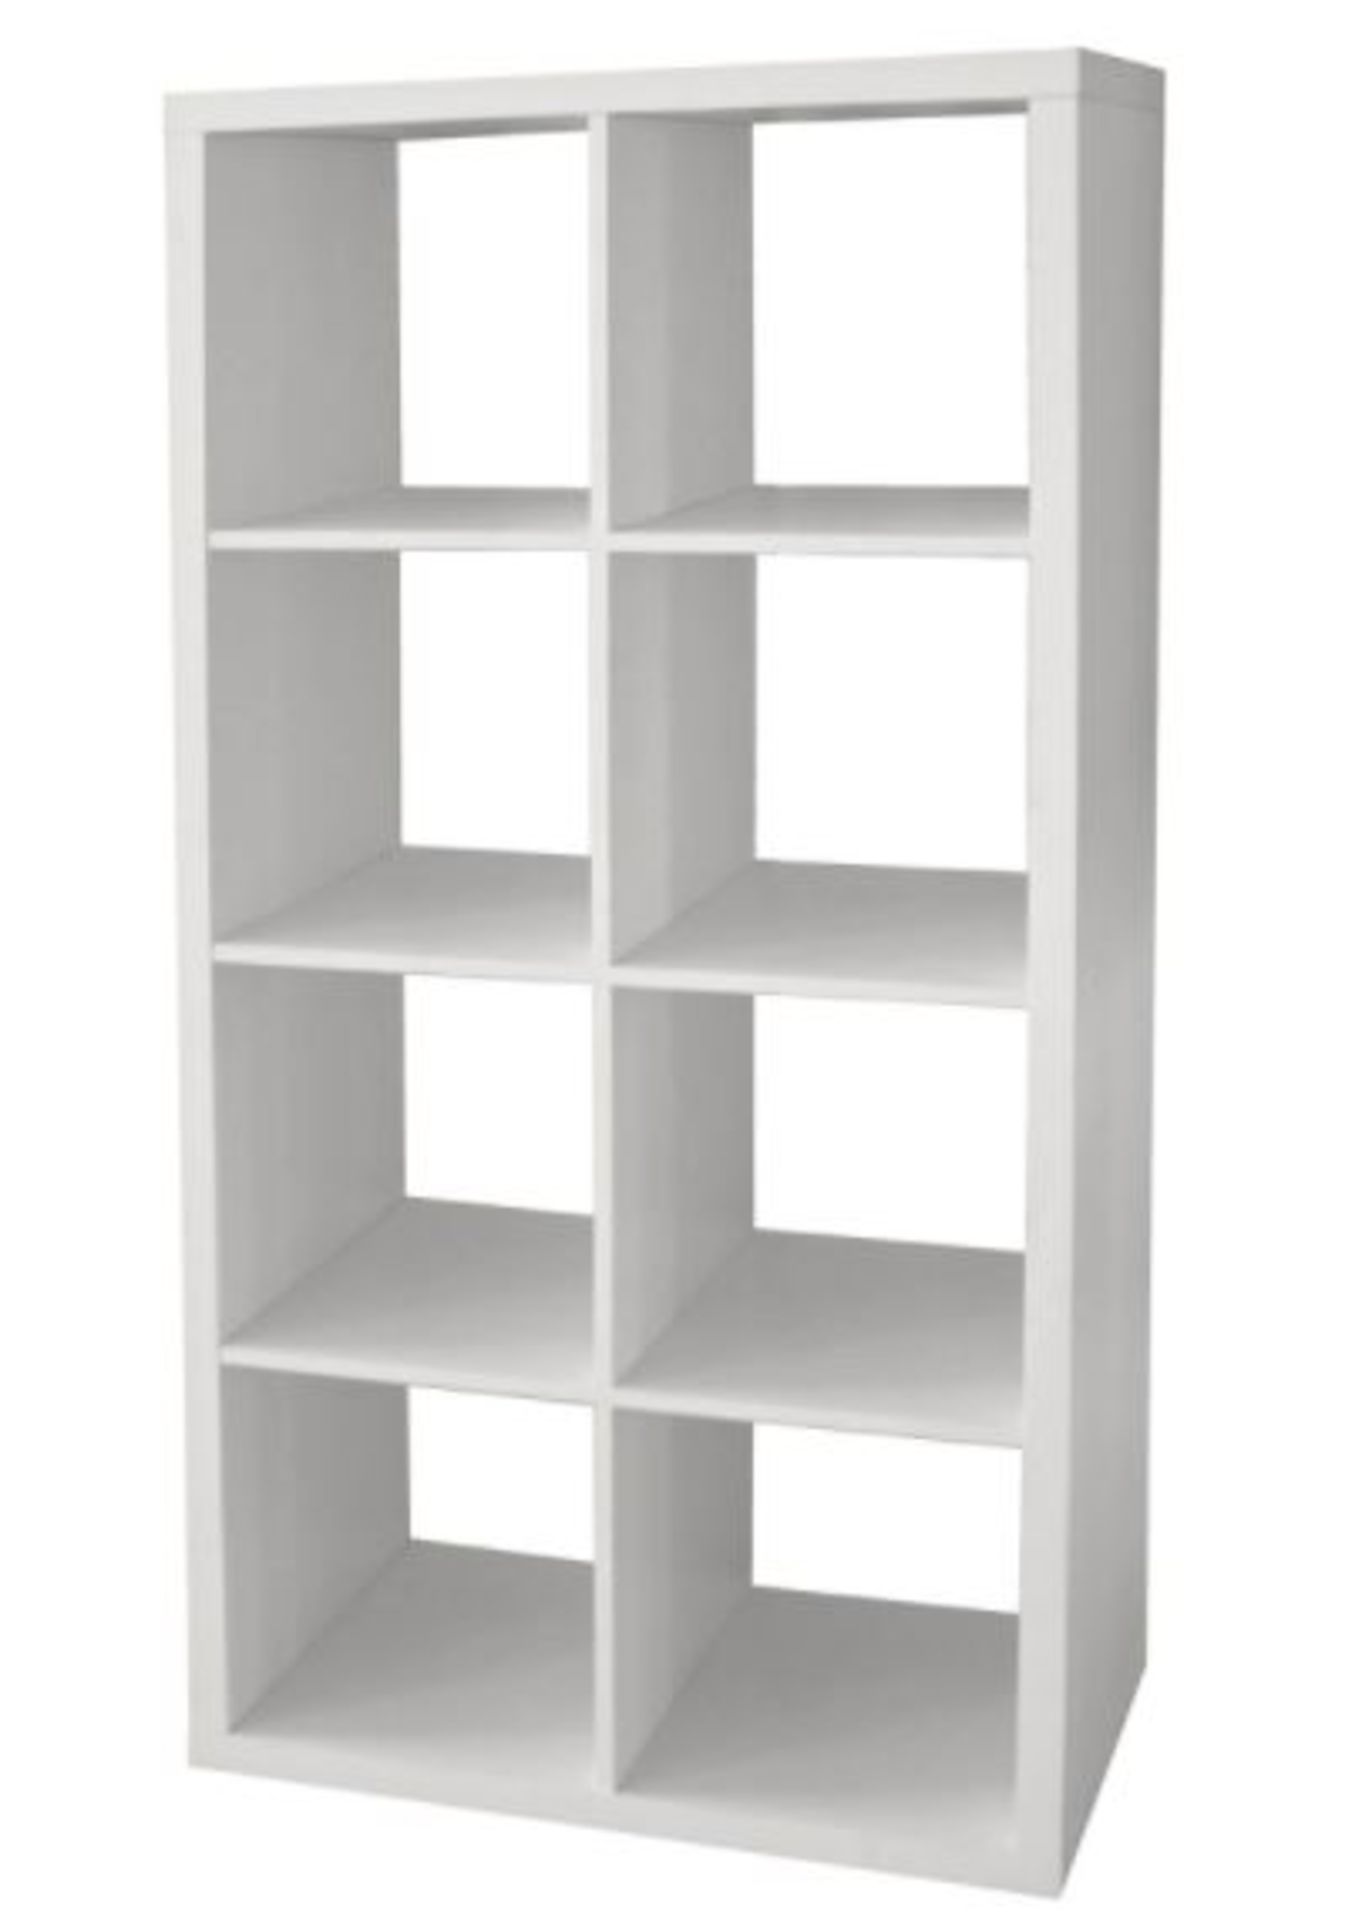 (R7L) Household. 1 X Living Elements Clever Cube 2 X 4 Cube Storage Unit White Matt Finish. (H1460 - Image 3 of 4